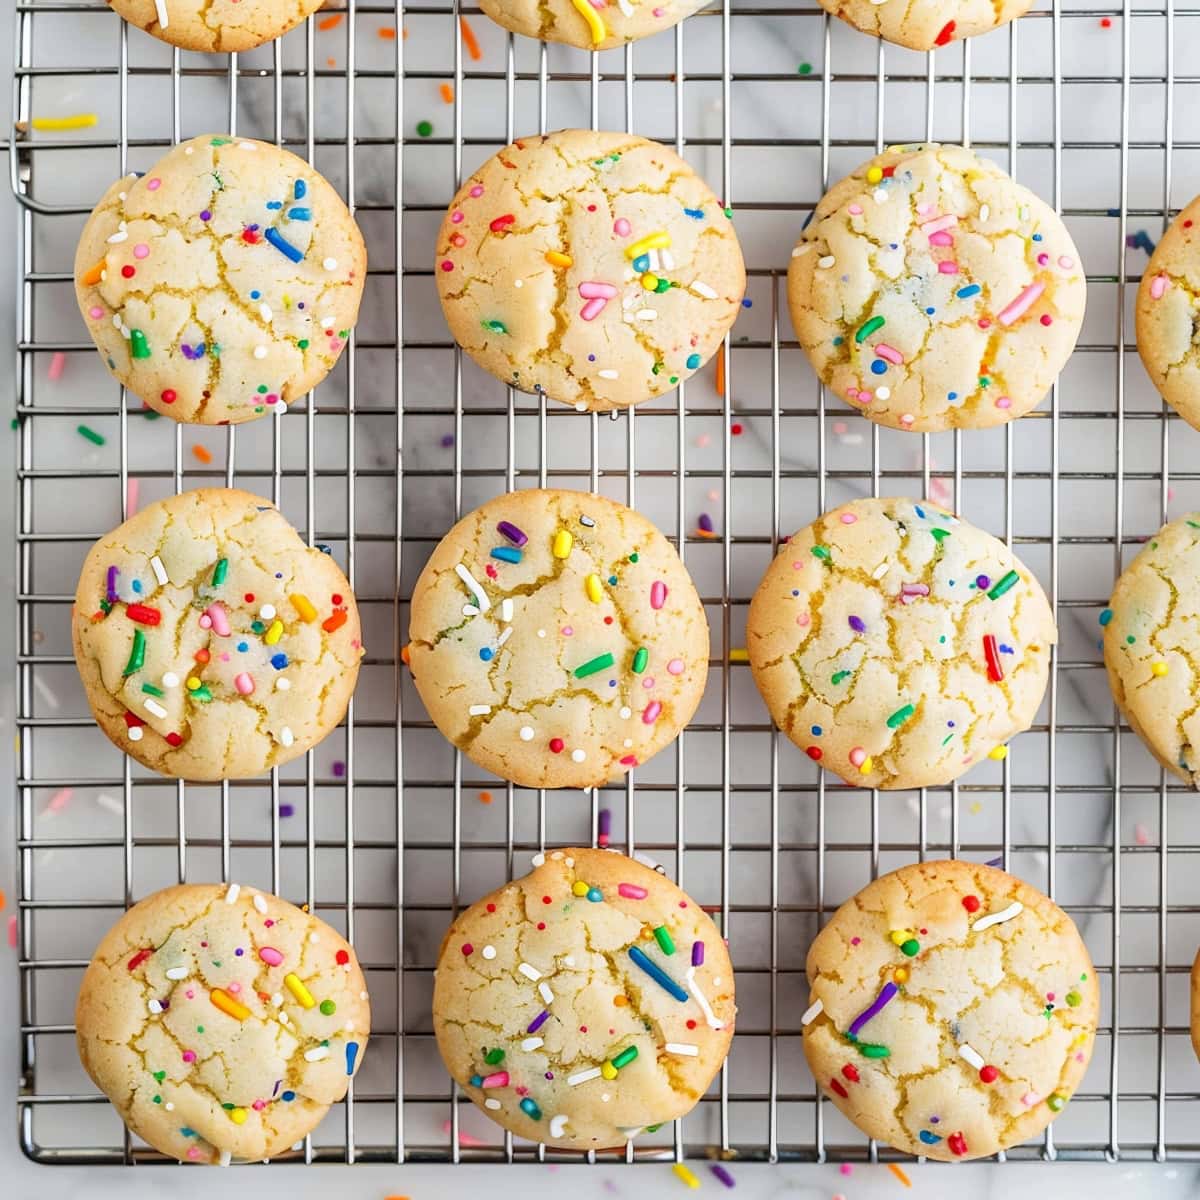 Overhead view of chewy funfetti cake mix cookies on a wire rack